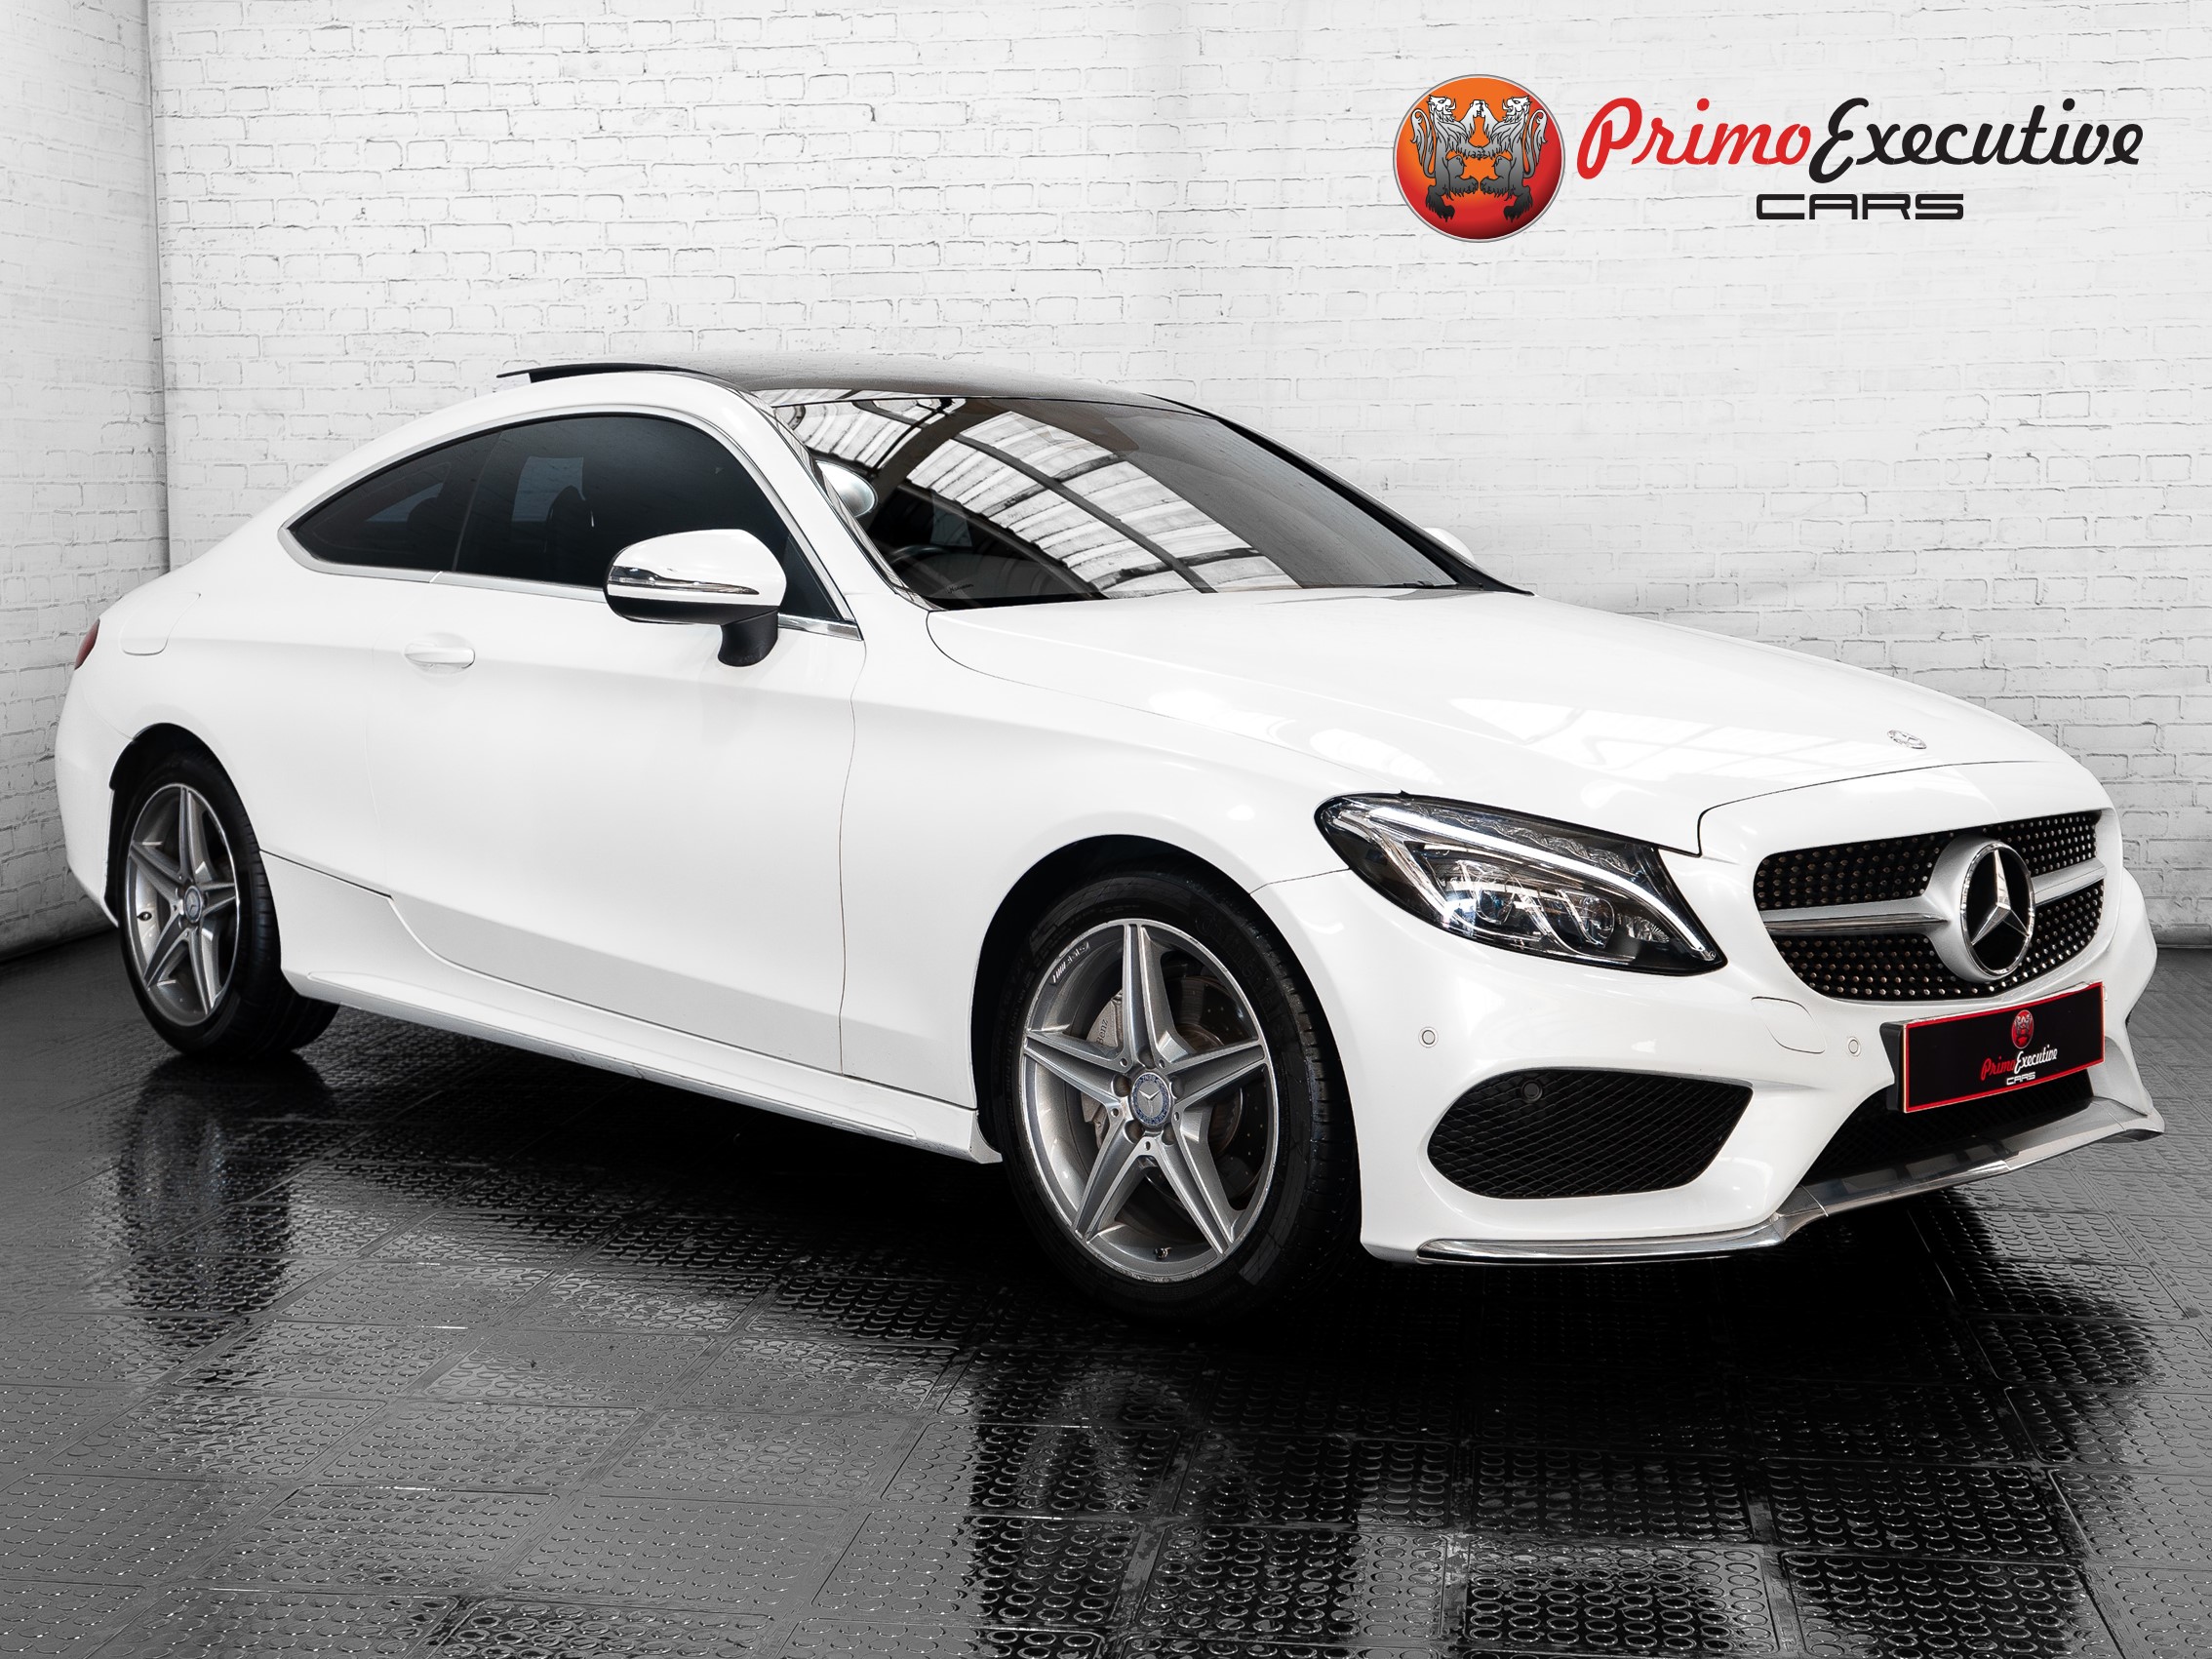 2016 Mercedes-Benz C-Class Coupe  for sale - 510574